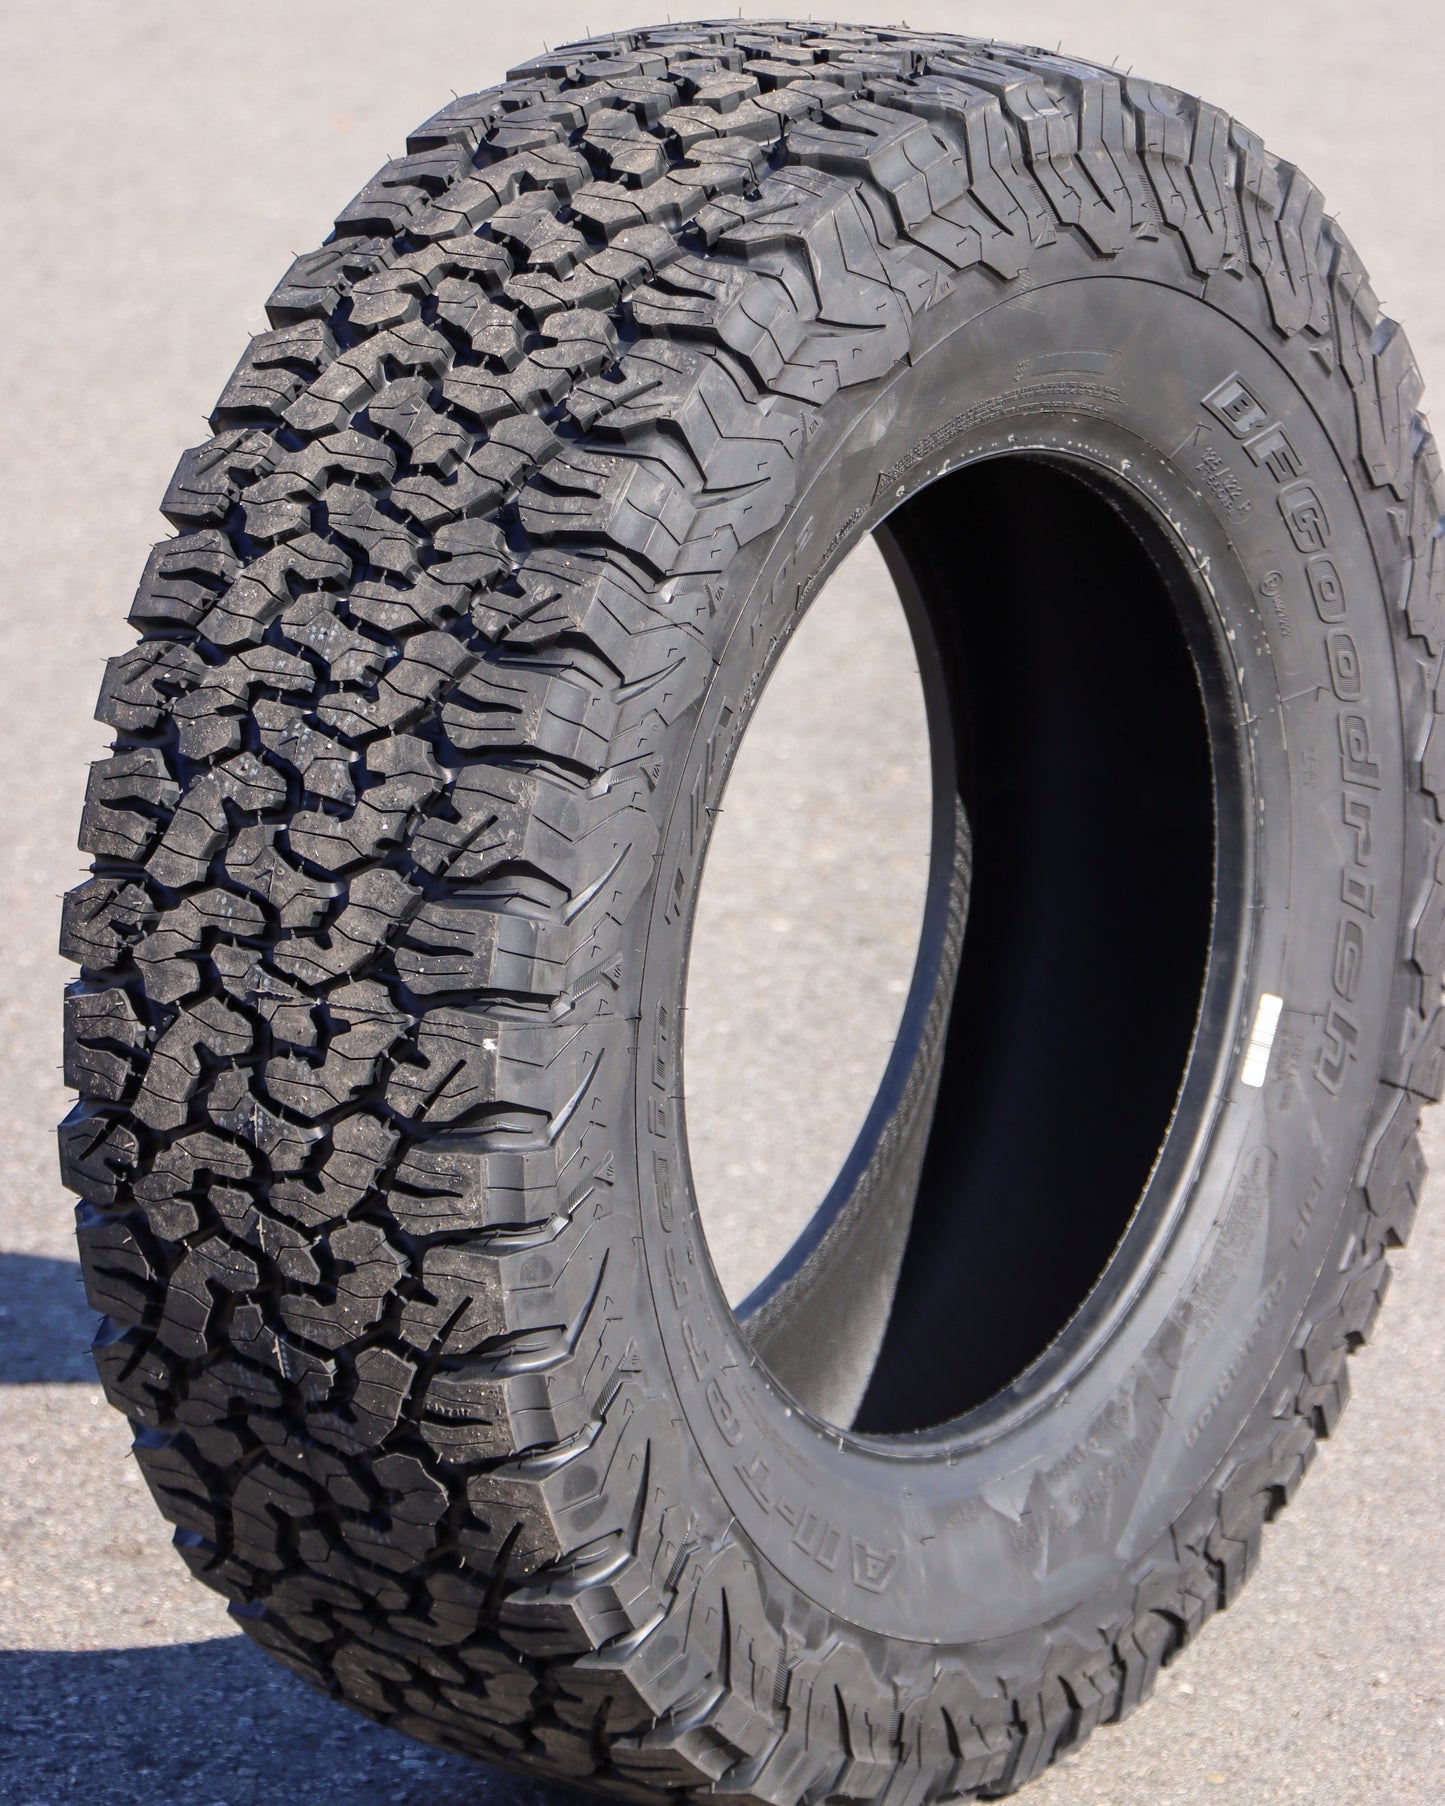 Close-up of the BFG KO2 all-terrain tire